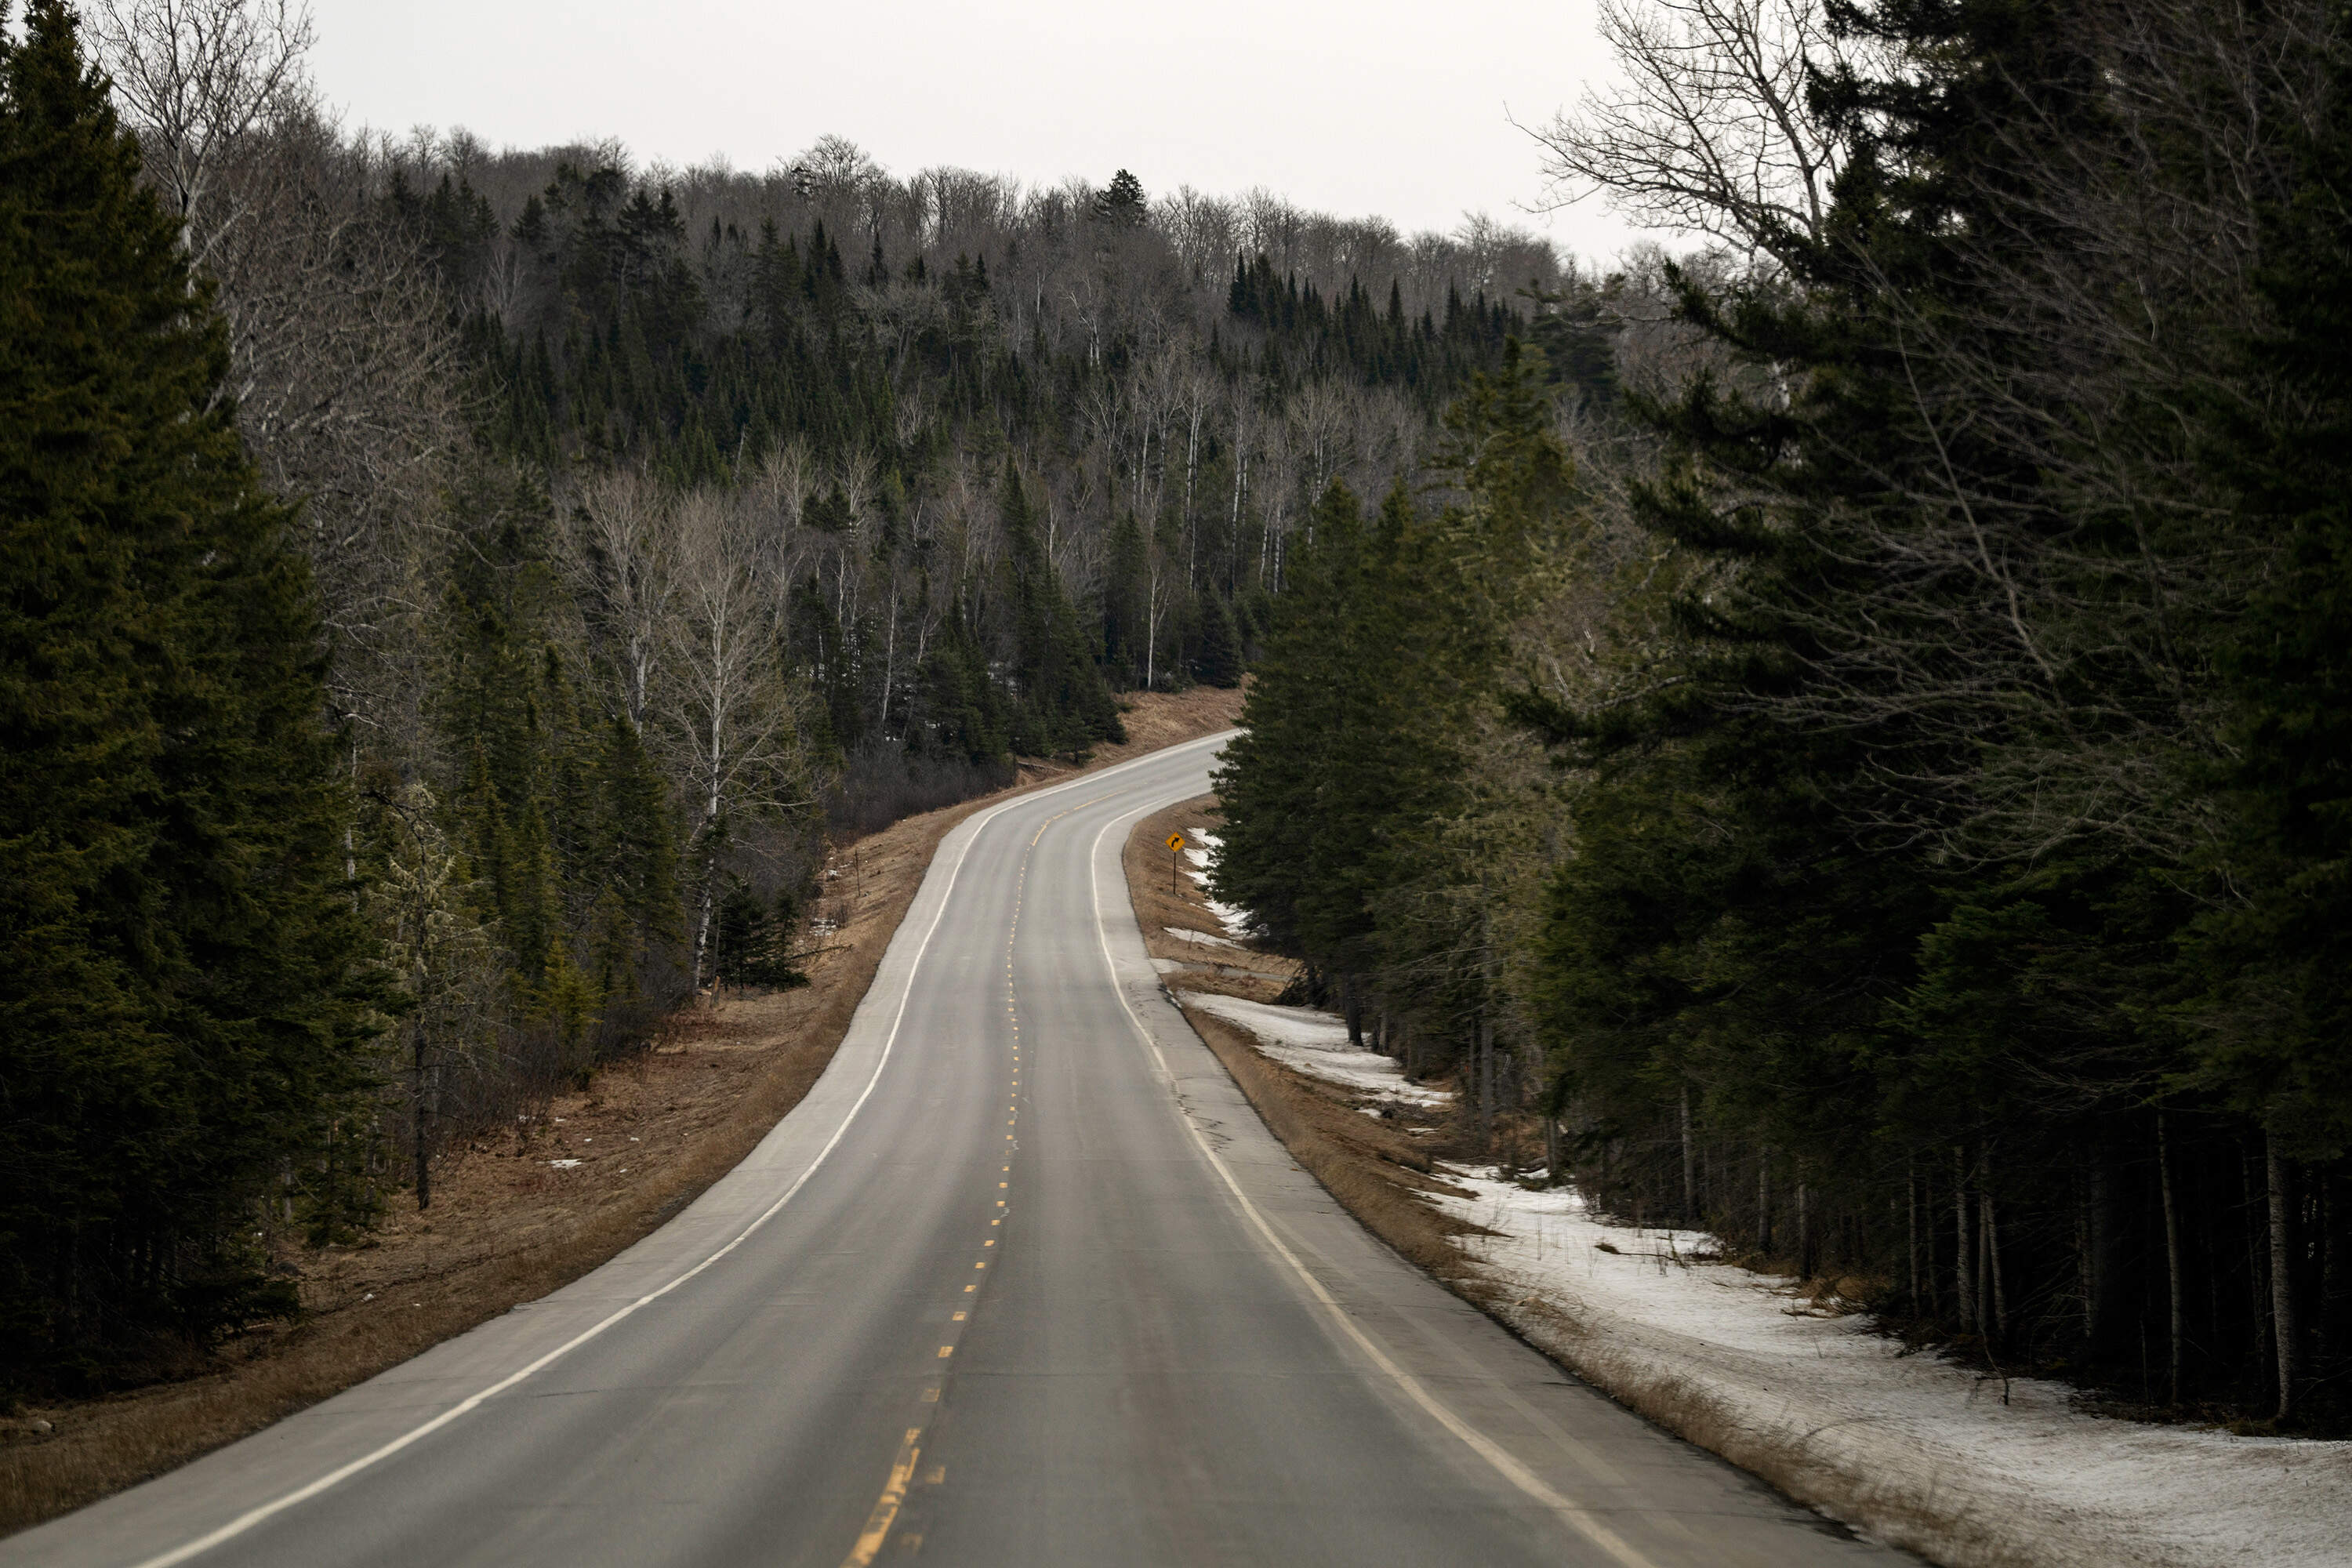 The highway to Caribou in Aroostook County, Maine, near the Canadian border. (Ashley L. Conti for The New York Times)